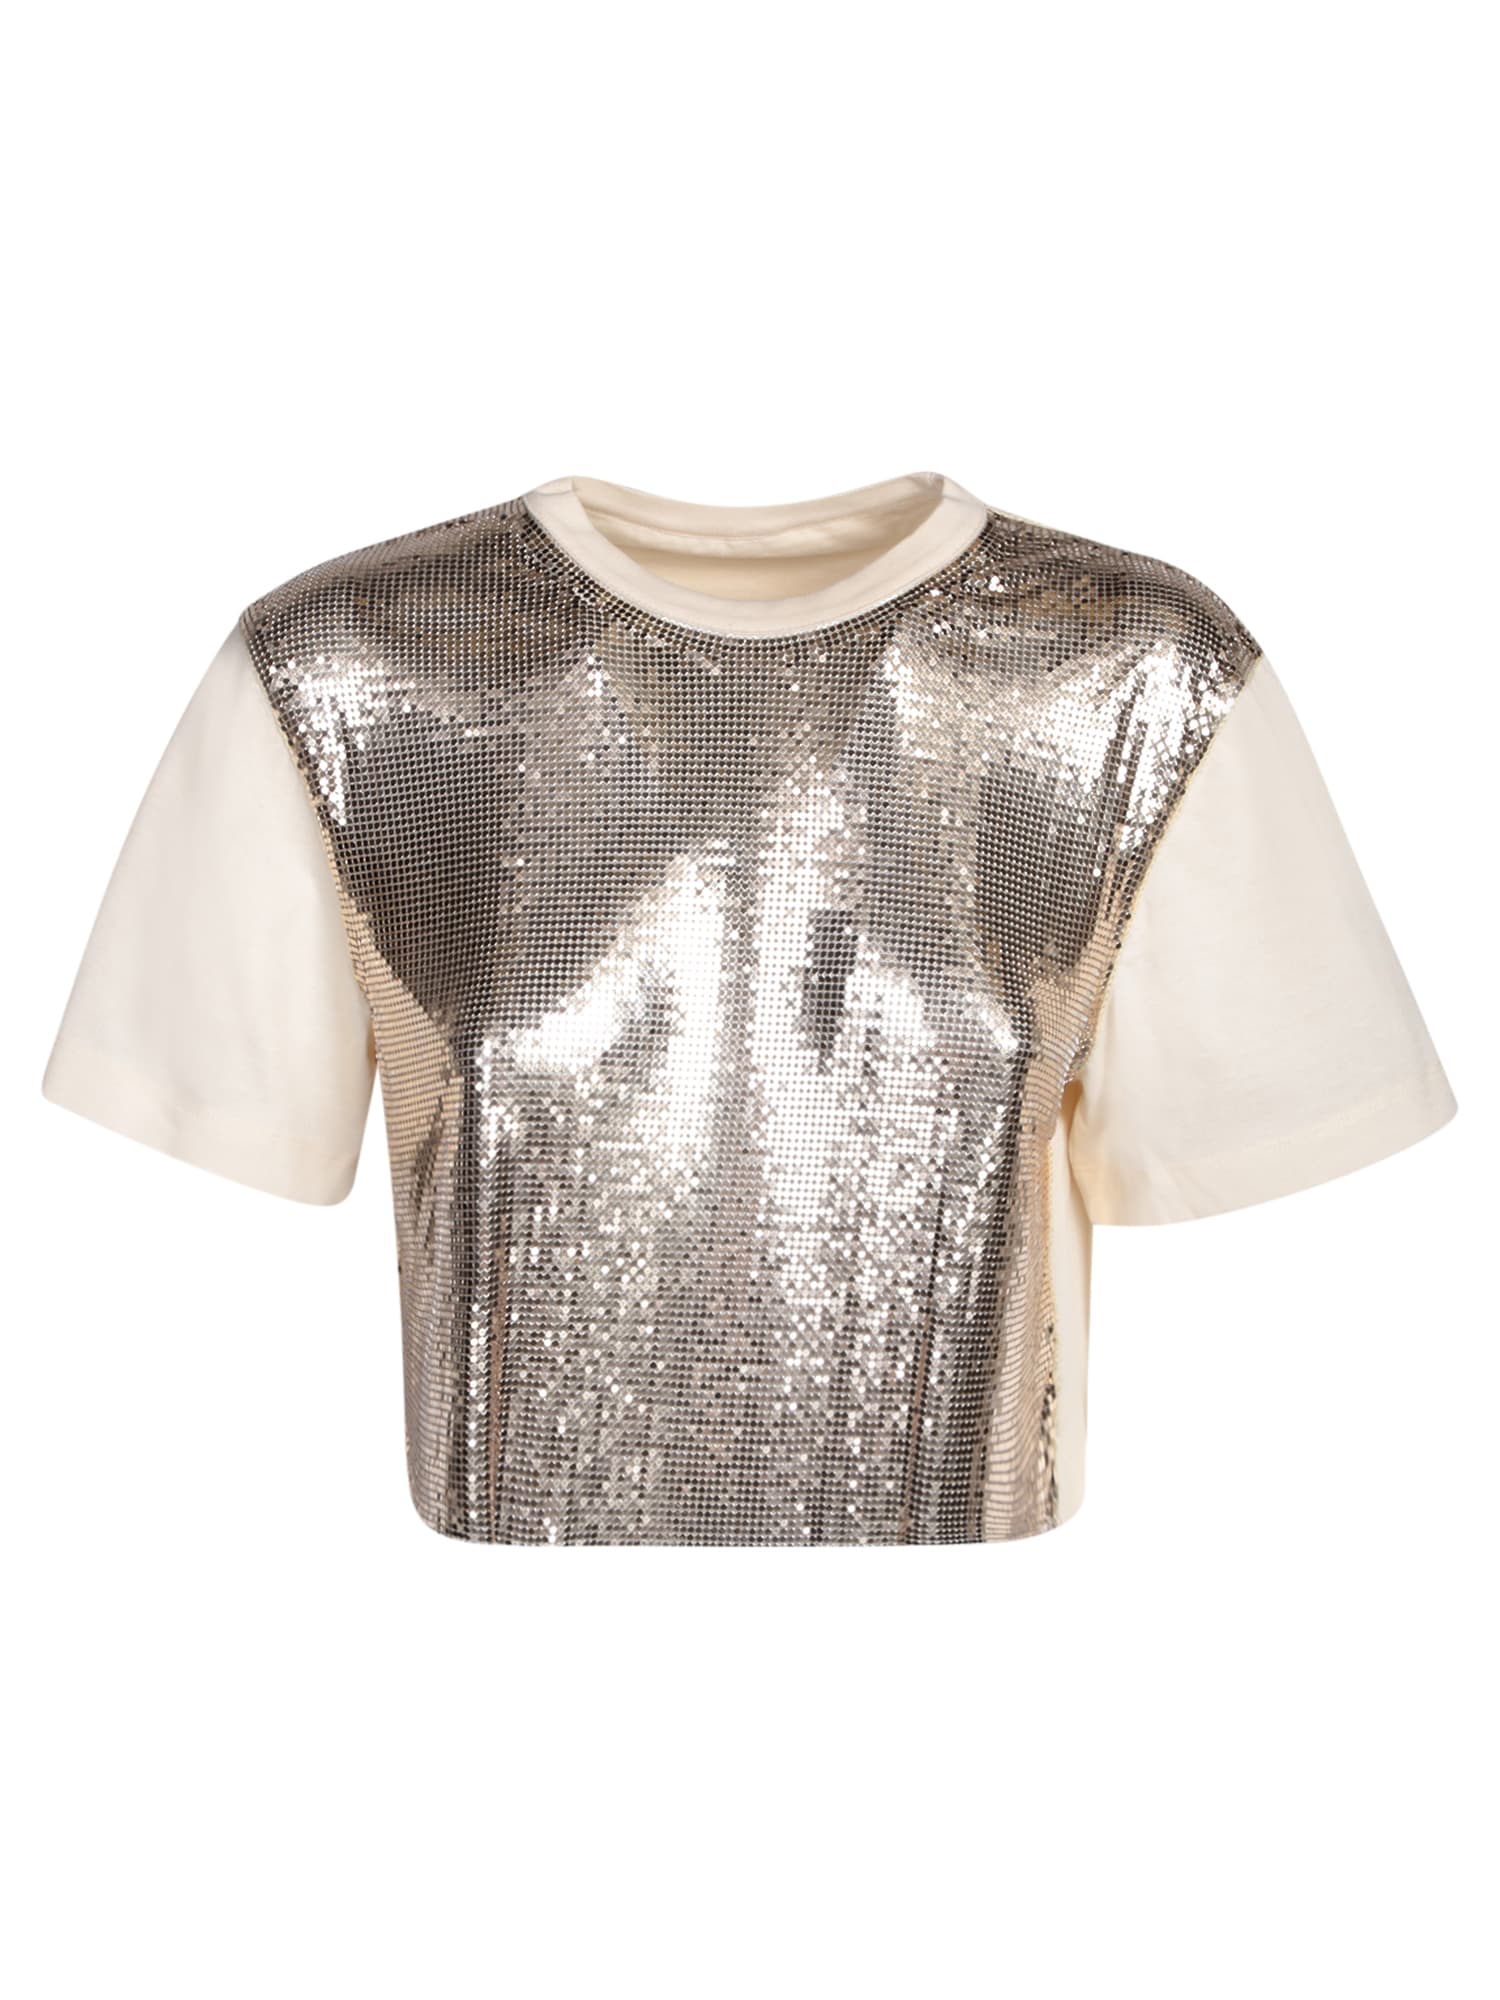 Nude Top In Shiny Mix-mesh